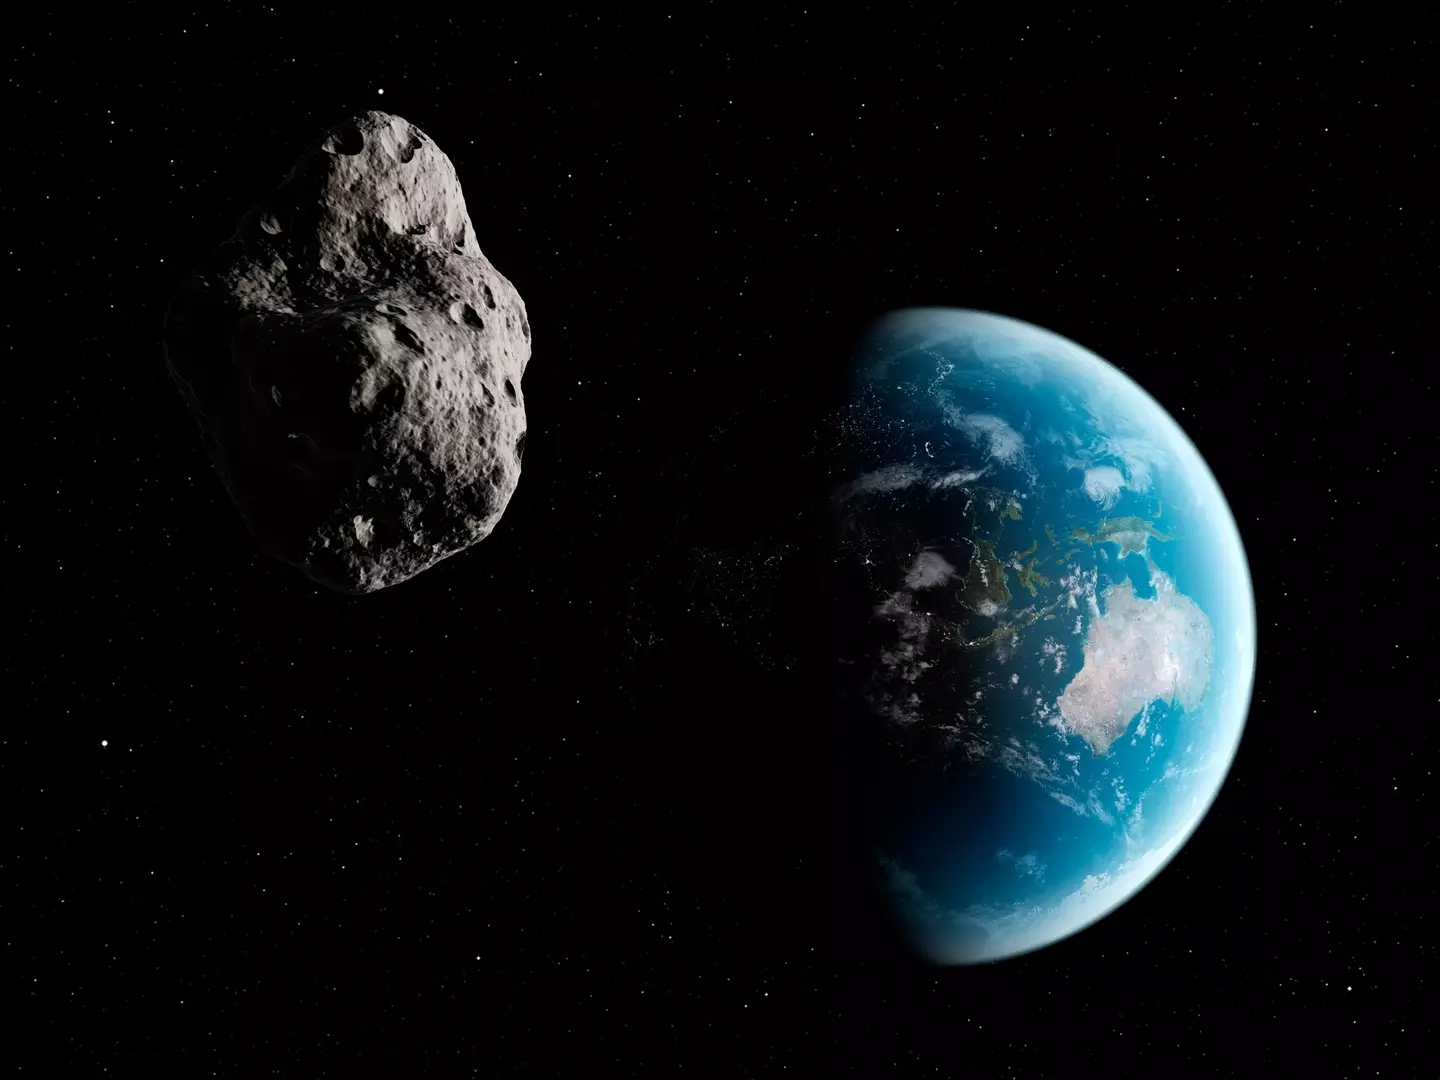 The asteroid with the potential to hit Earth has been picked up in recent weeks.